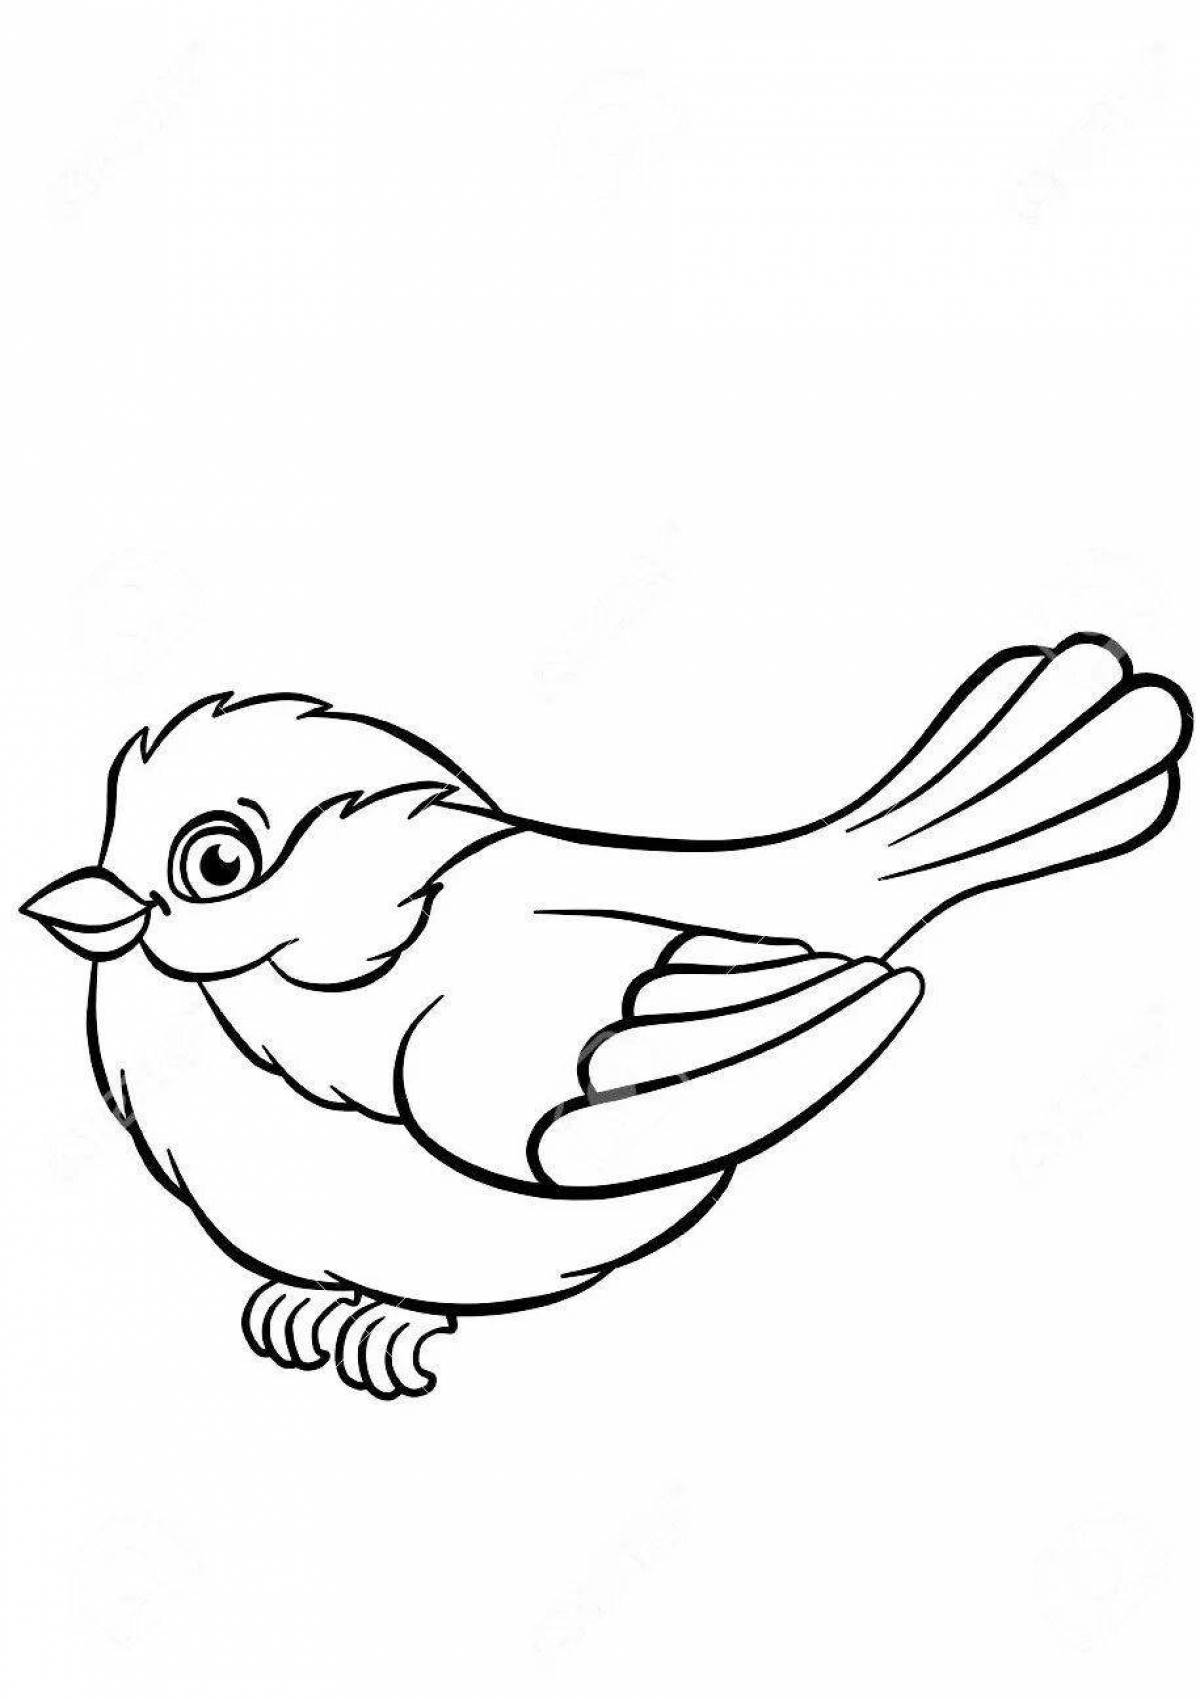 Adorable tit coloring book for 2-3 year olds